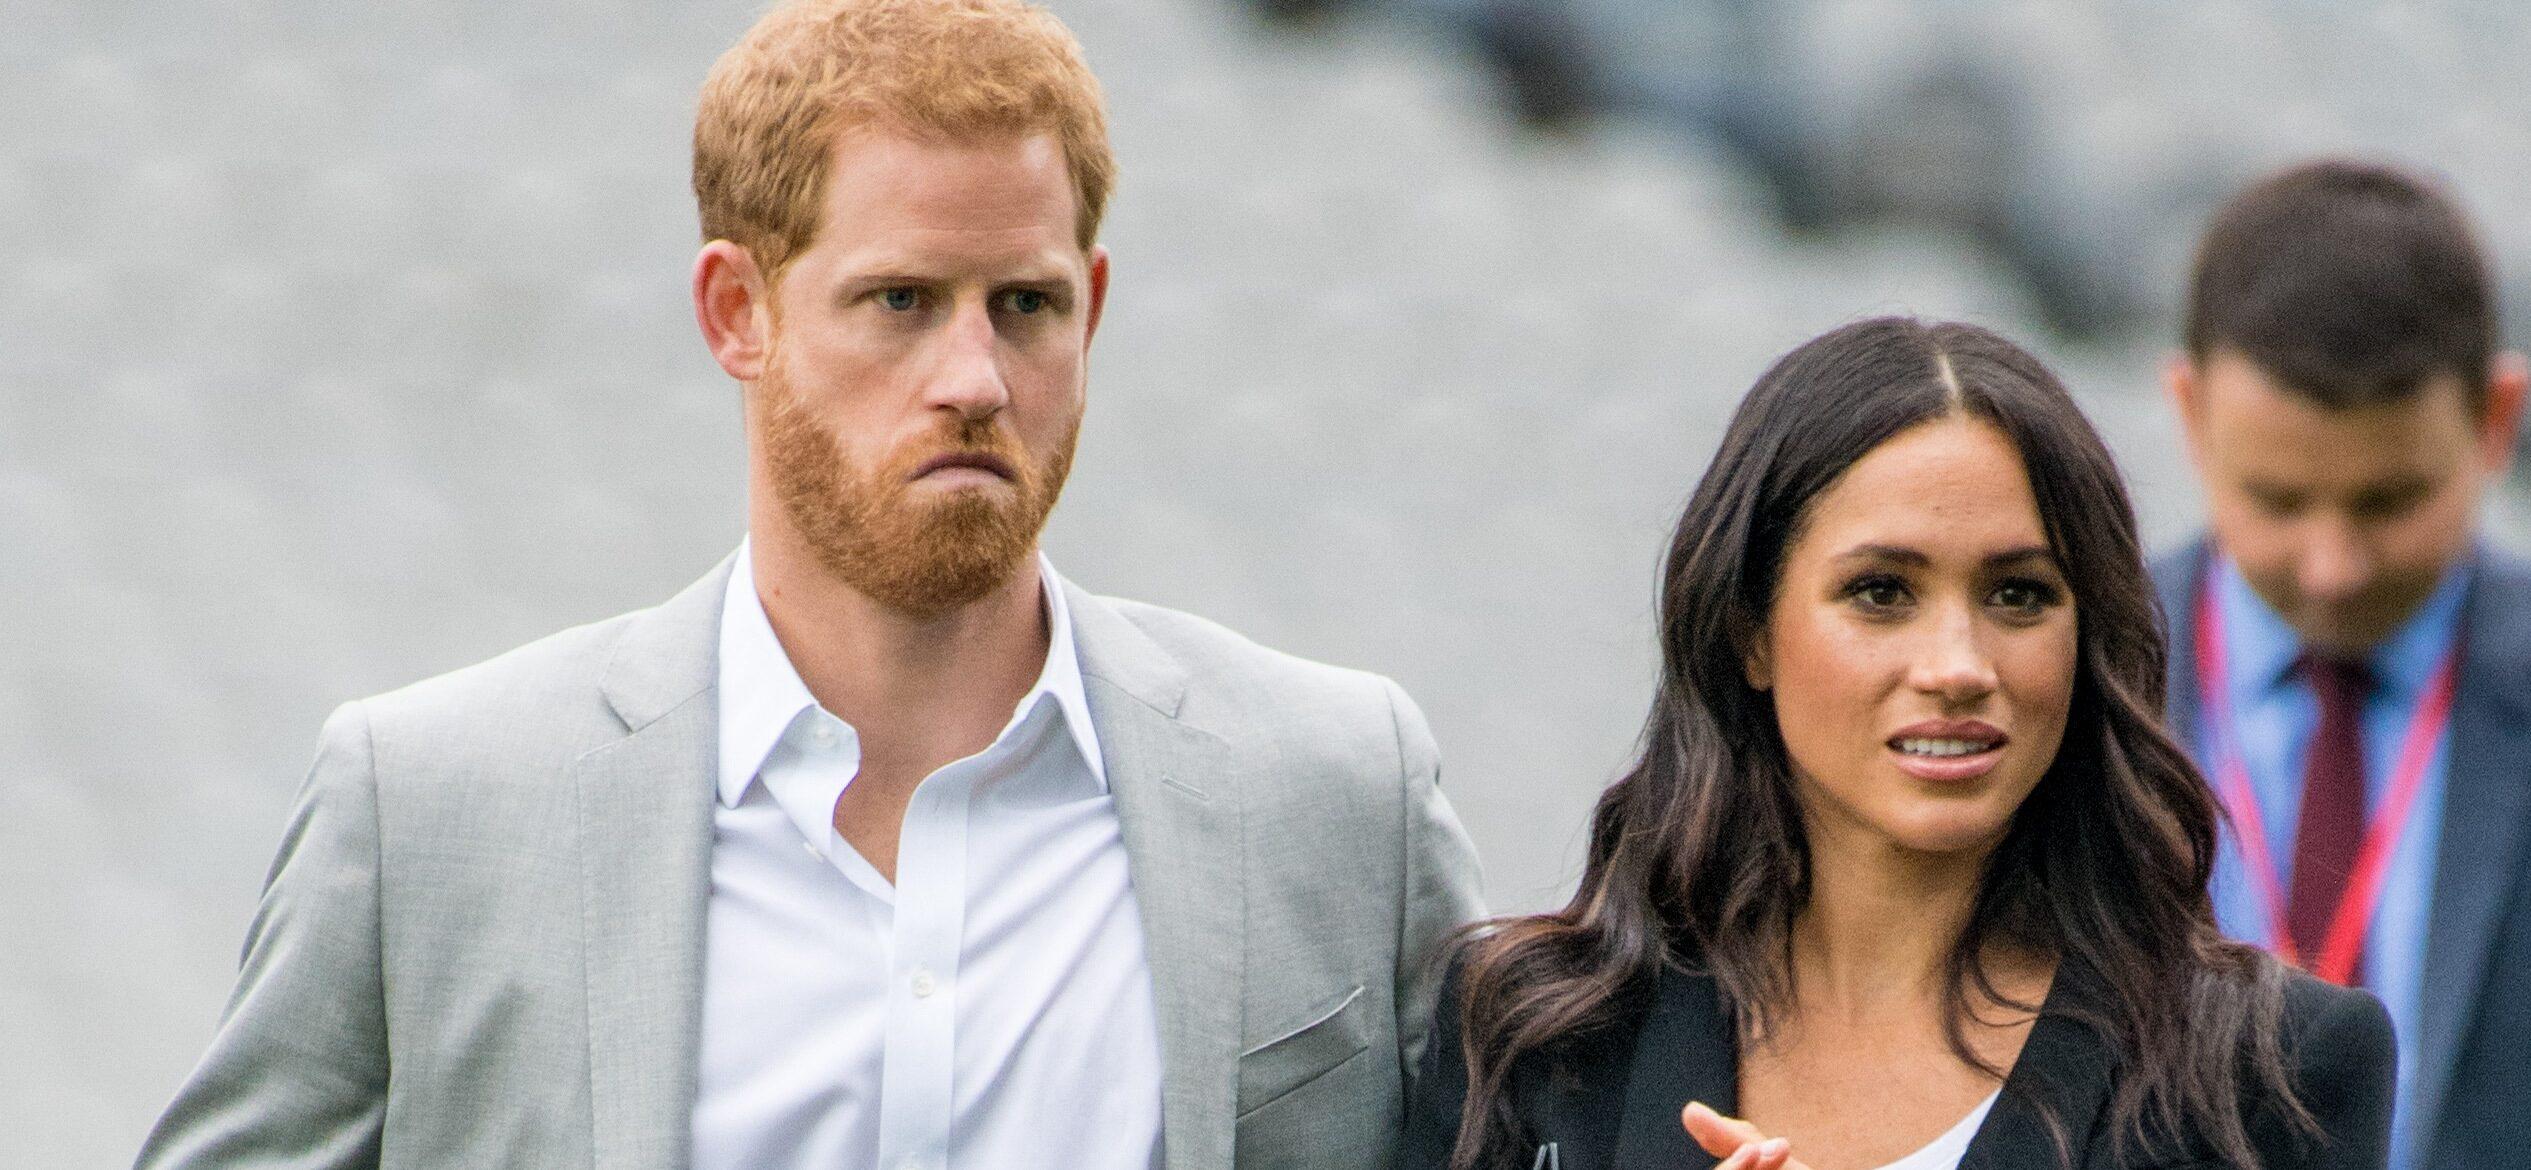 Prince Harry Barred From Taking Claims Against Rupert Murdoch Involving Meghan Markle To Trial